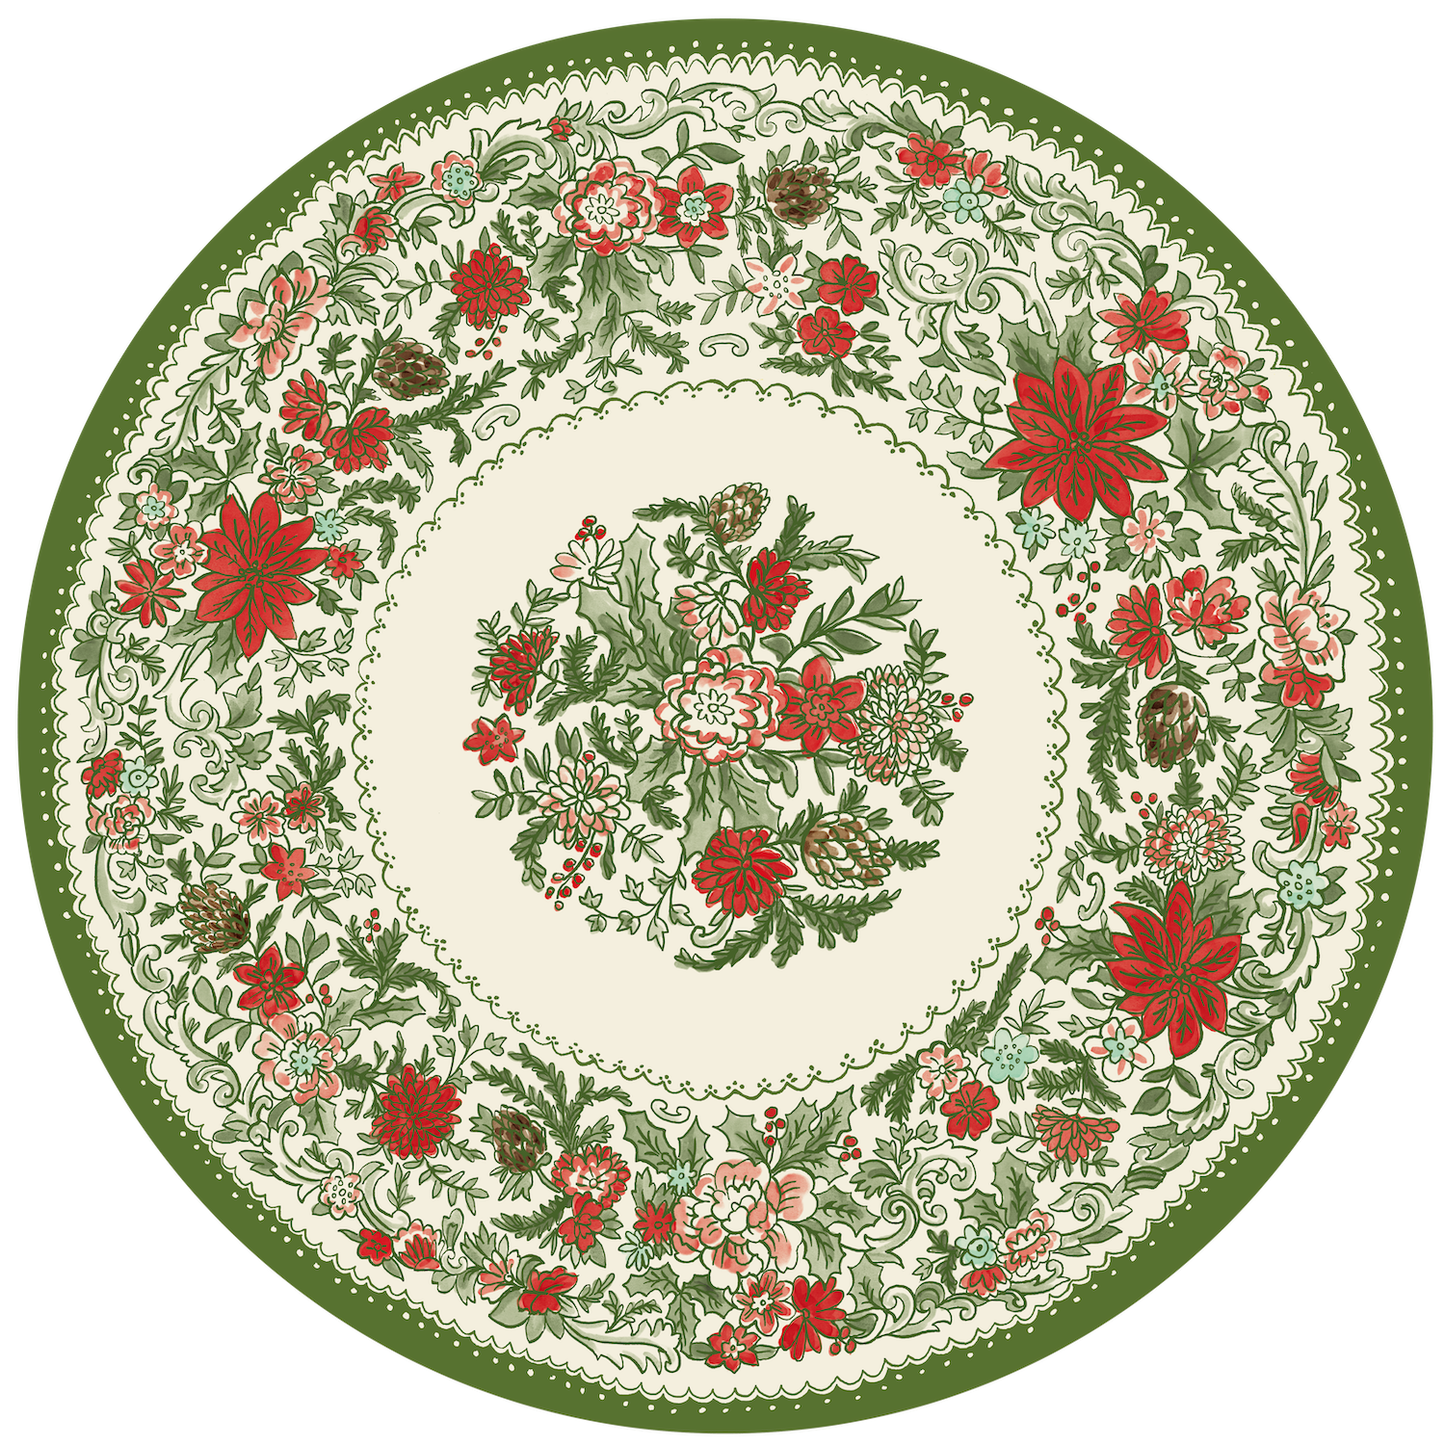 Die-Cut Christmas China Placemats